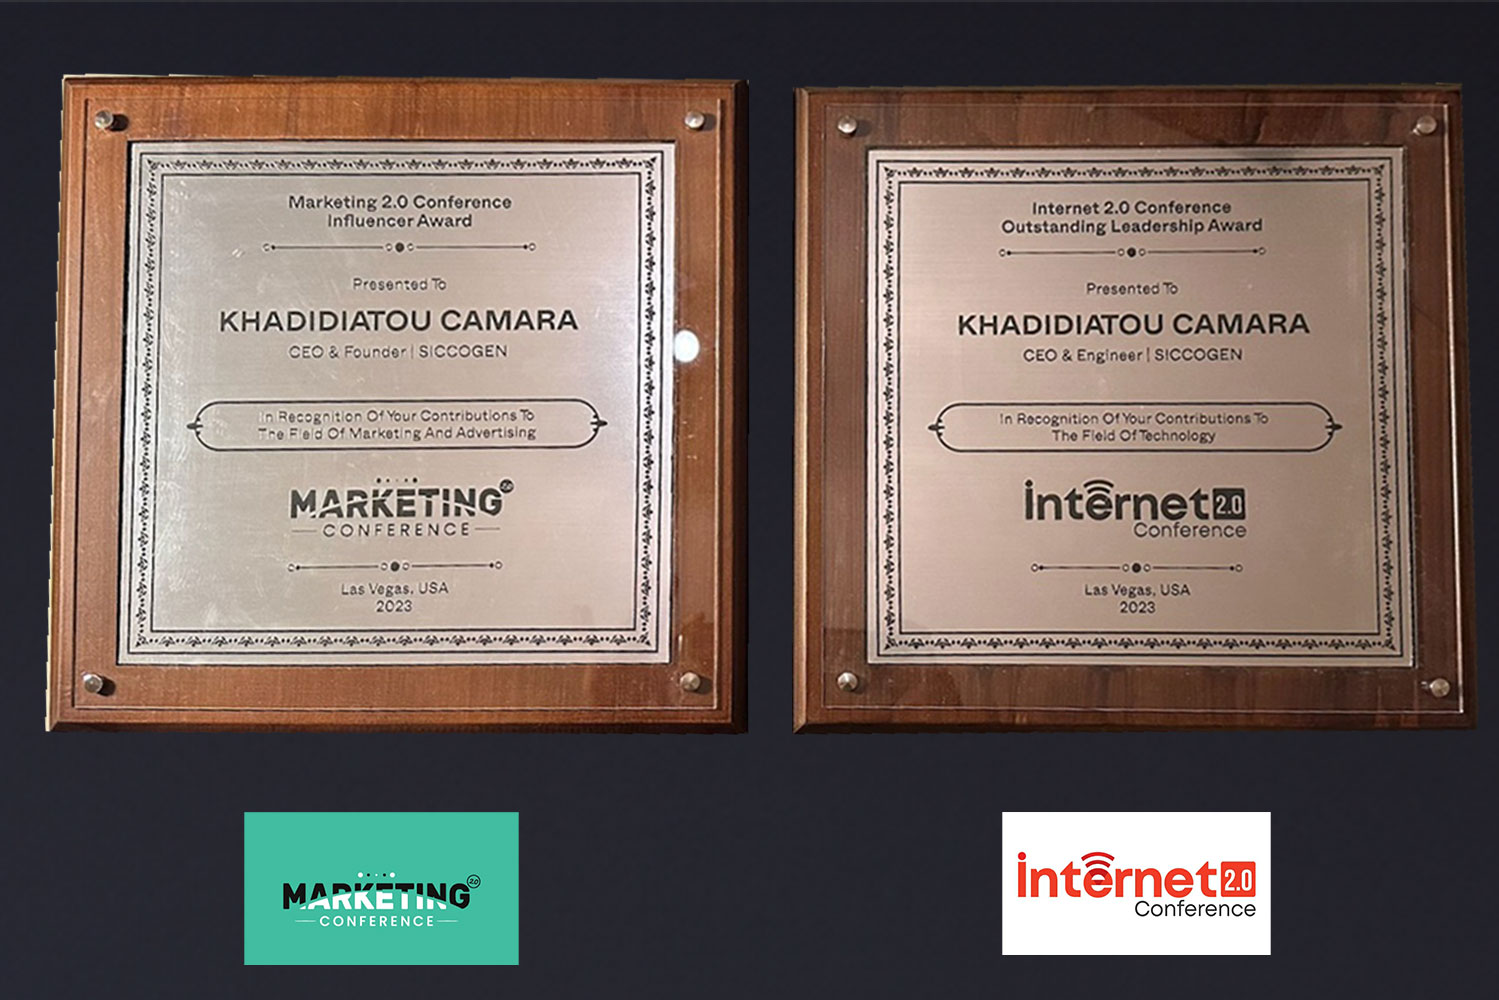 Khadidiatou CAMARA receives the Influencer Award and the Outstanding leadership Award at Marketing 2.0 and Internet 2.0 conference in 2023 in Las Vegas